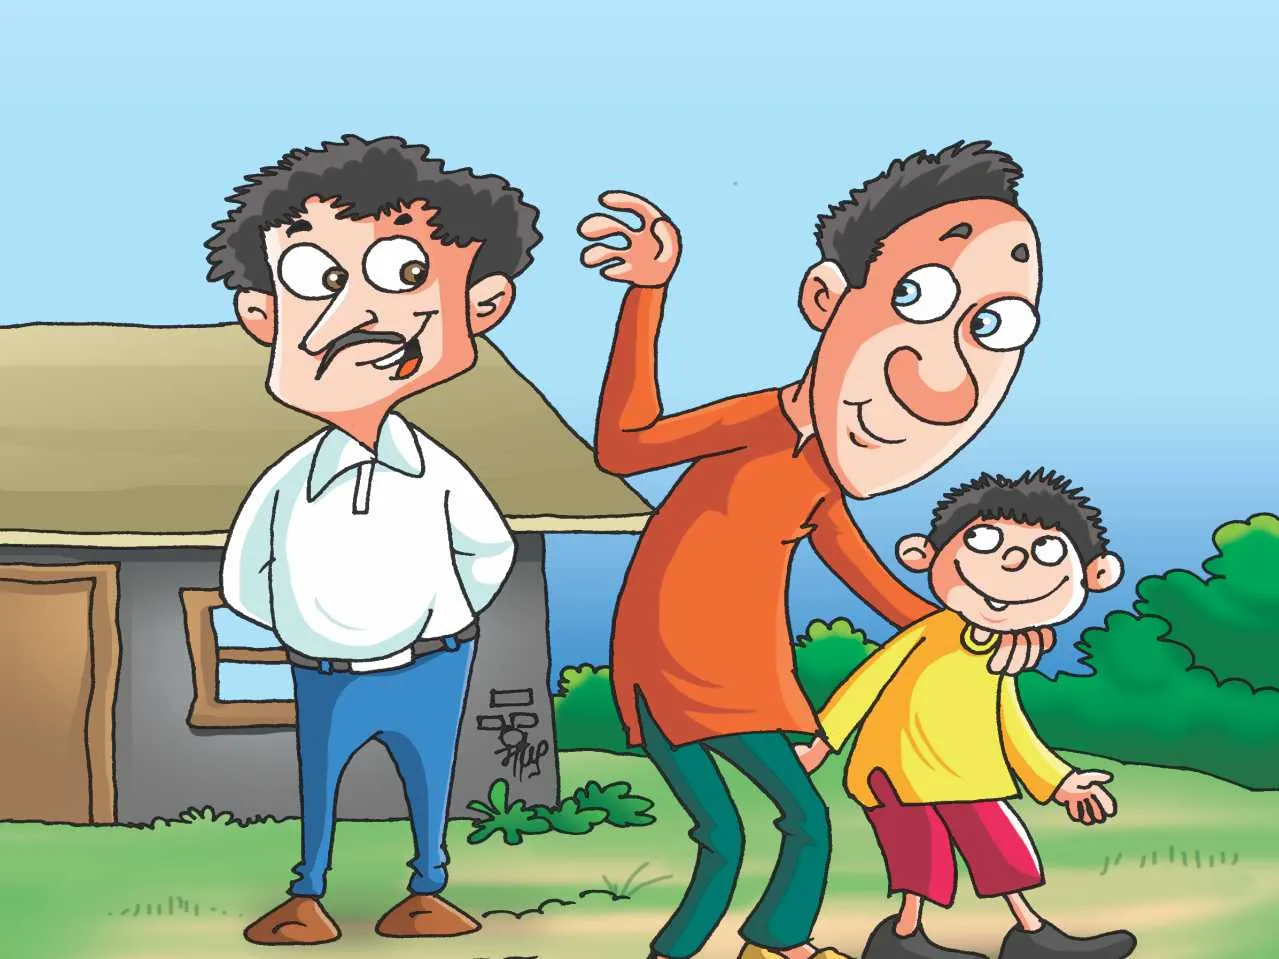 Two man with a kid cartoon image